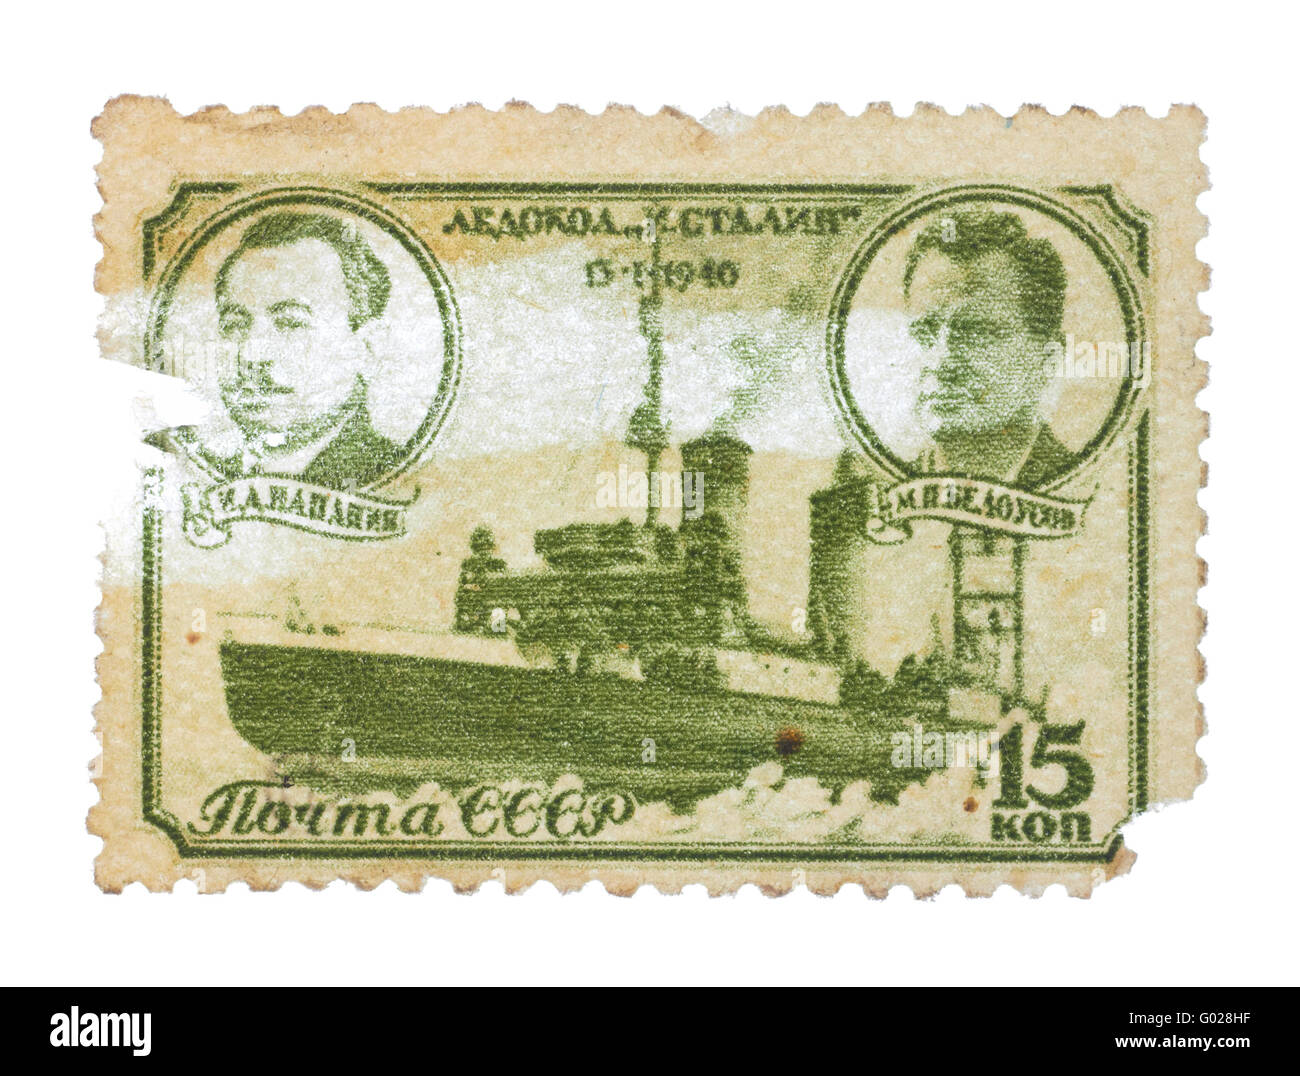 USSR - CIRCA 1945: A stamp printed in USSR shows image of the icebreaker Stalin, circa 1945 Stock Photo